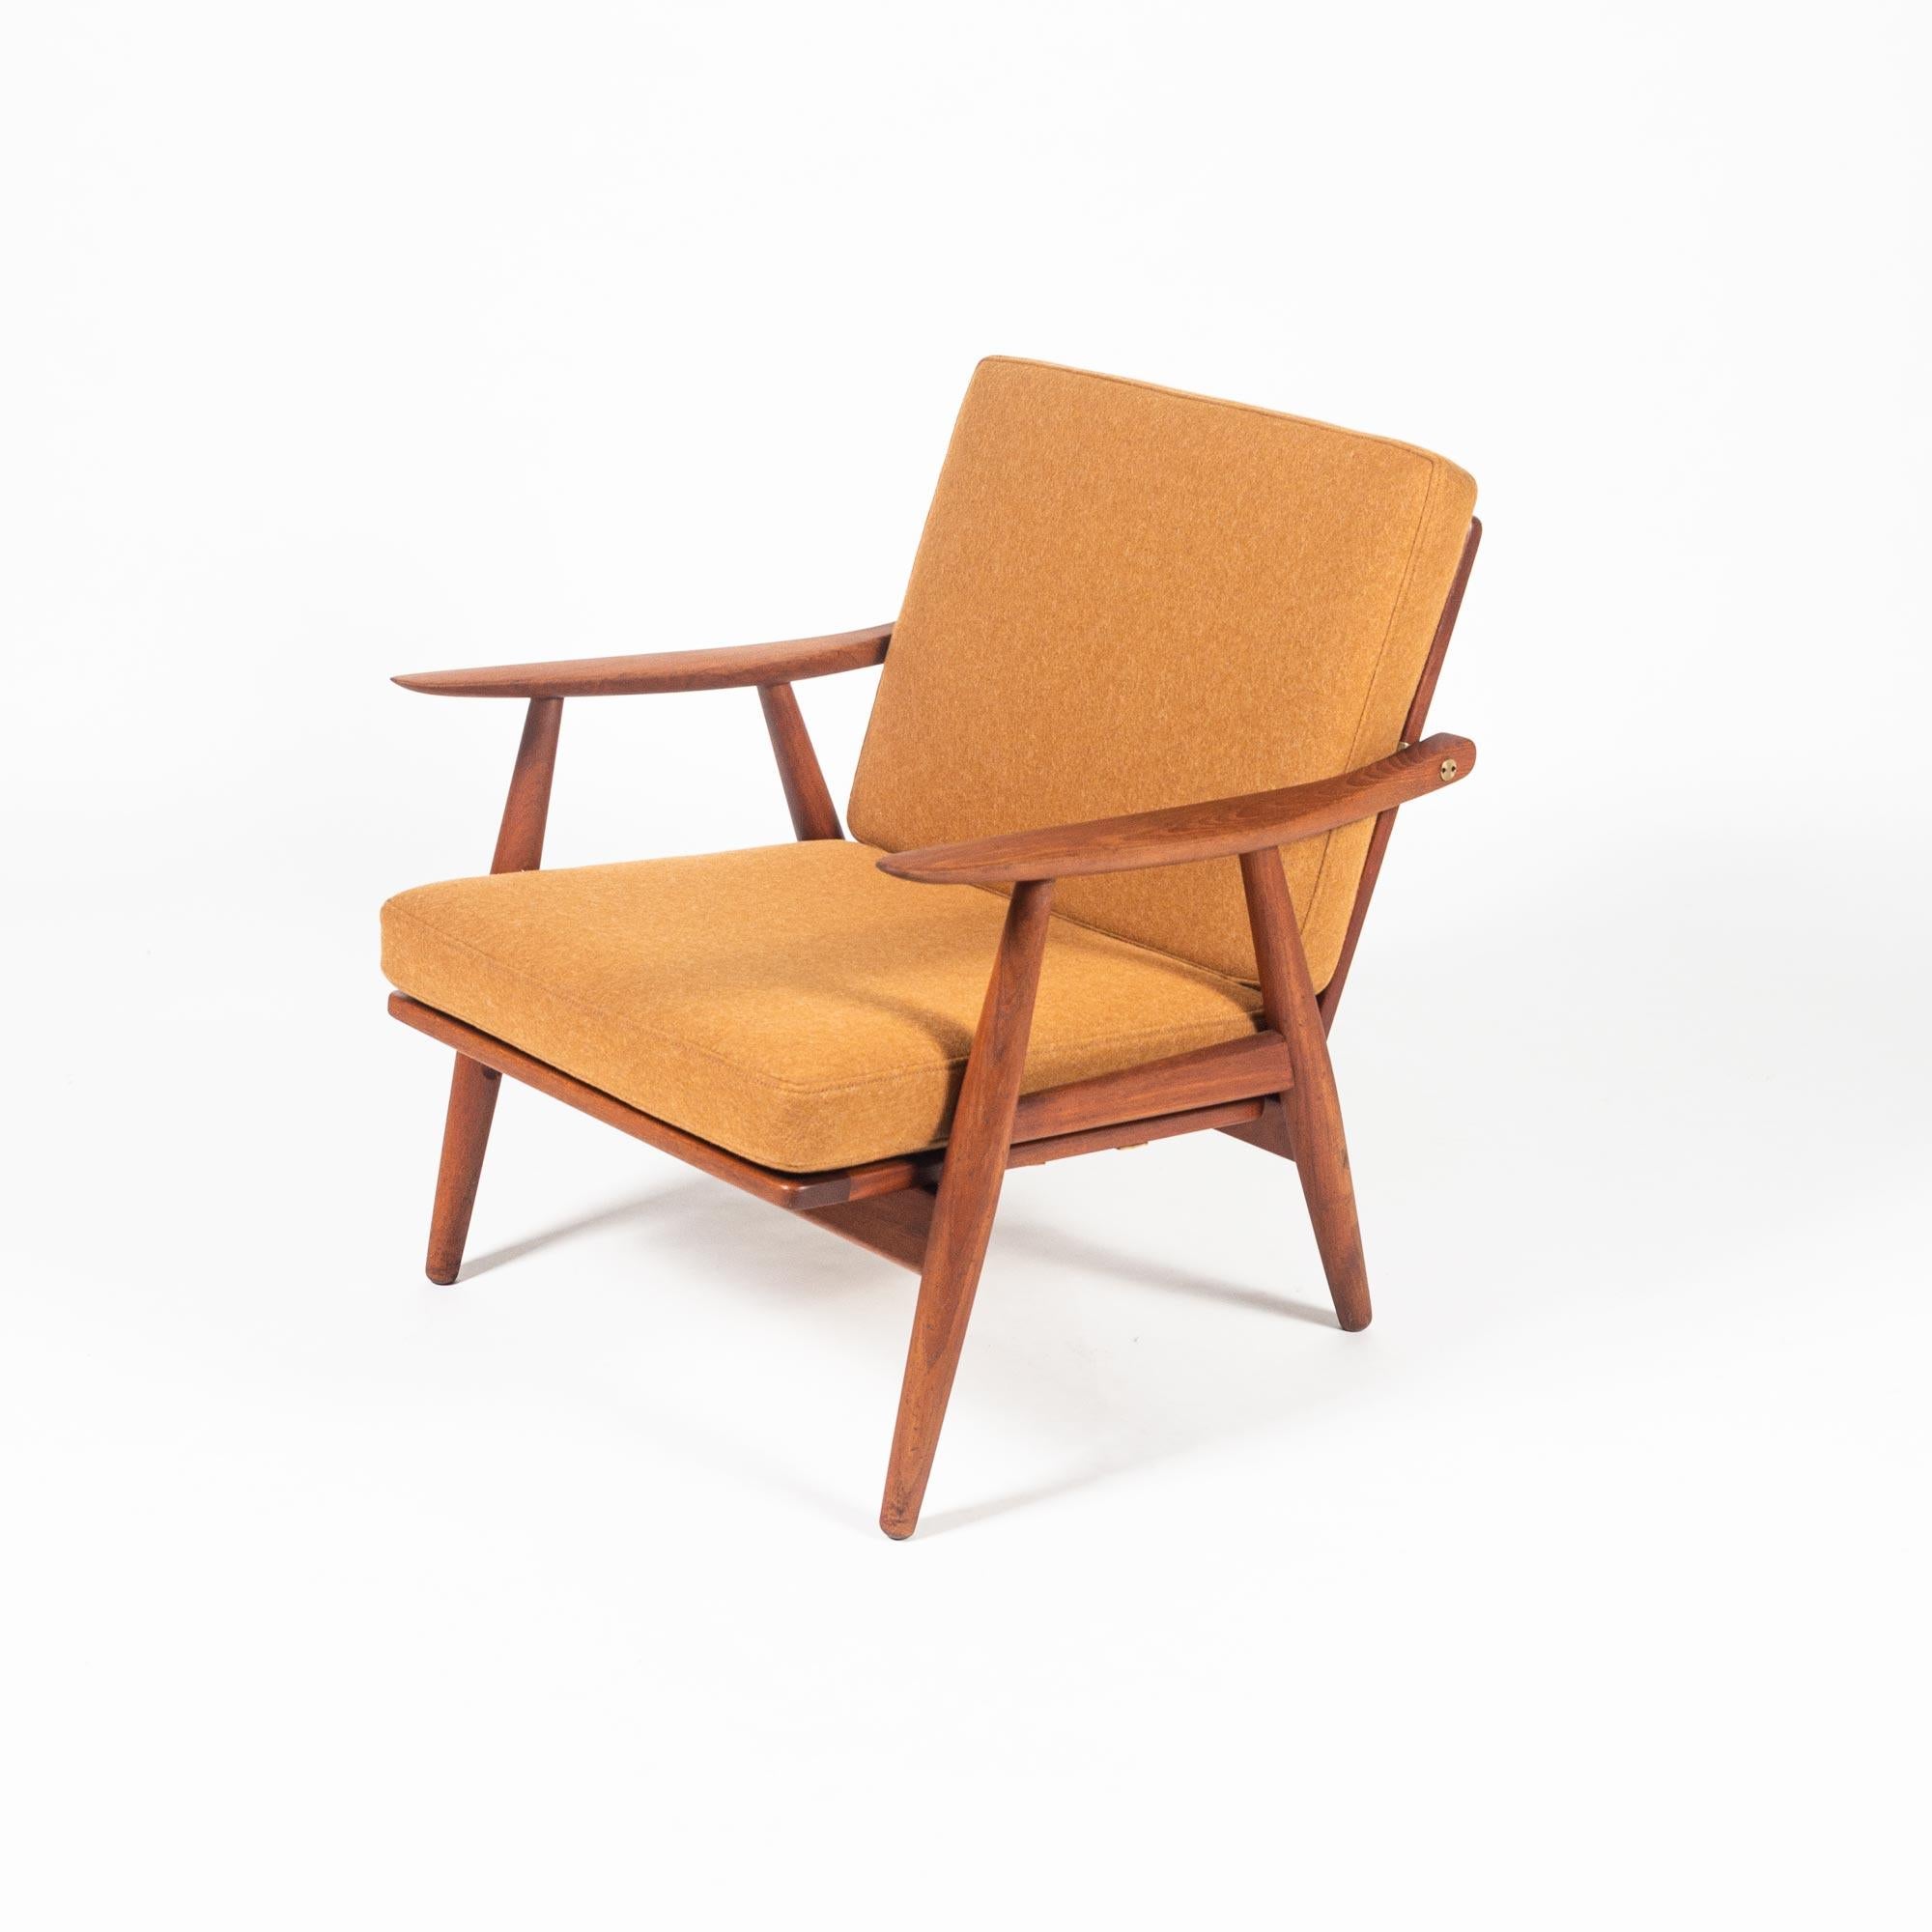 Hans Wegner GE-270 lounge chair in solid teak and newly upholstered in Dry Sunflower Canadian wool, circa 1950s. This lounge chair has a sculpted solid teak frame with exposed, bespoke brass fittings. Unlike the Wegner Cigar Series or other lounge